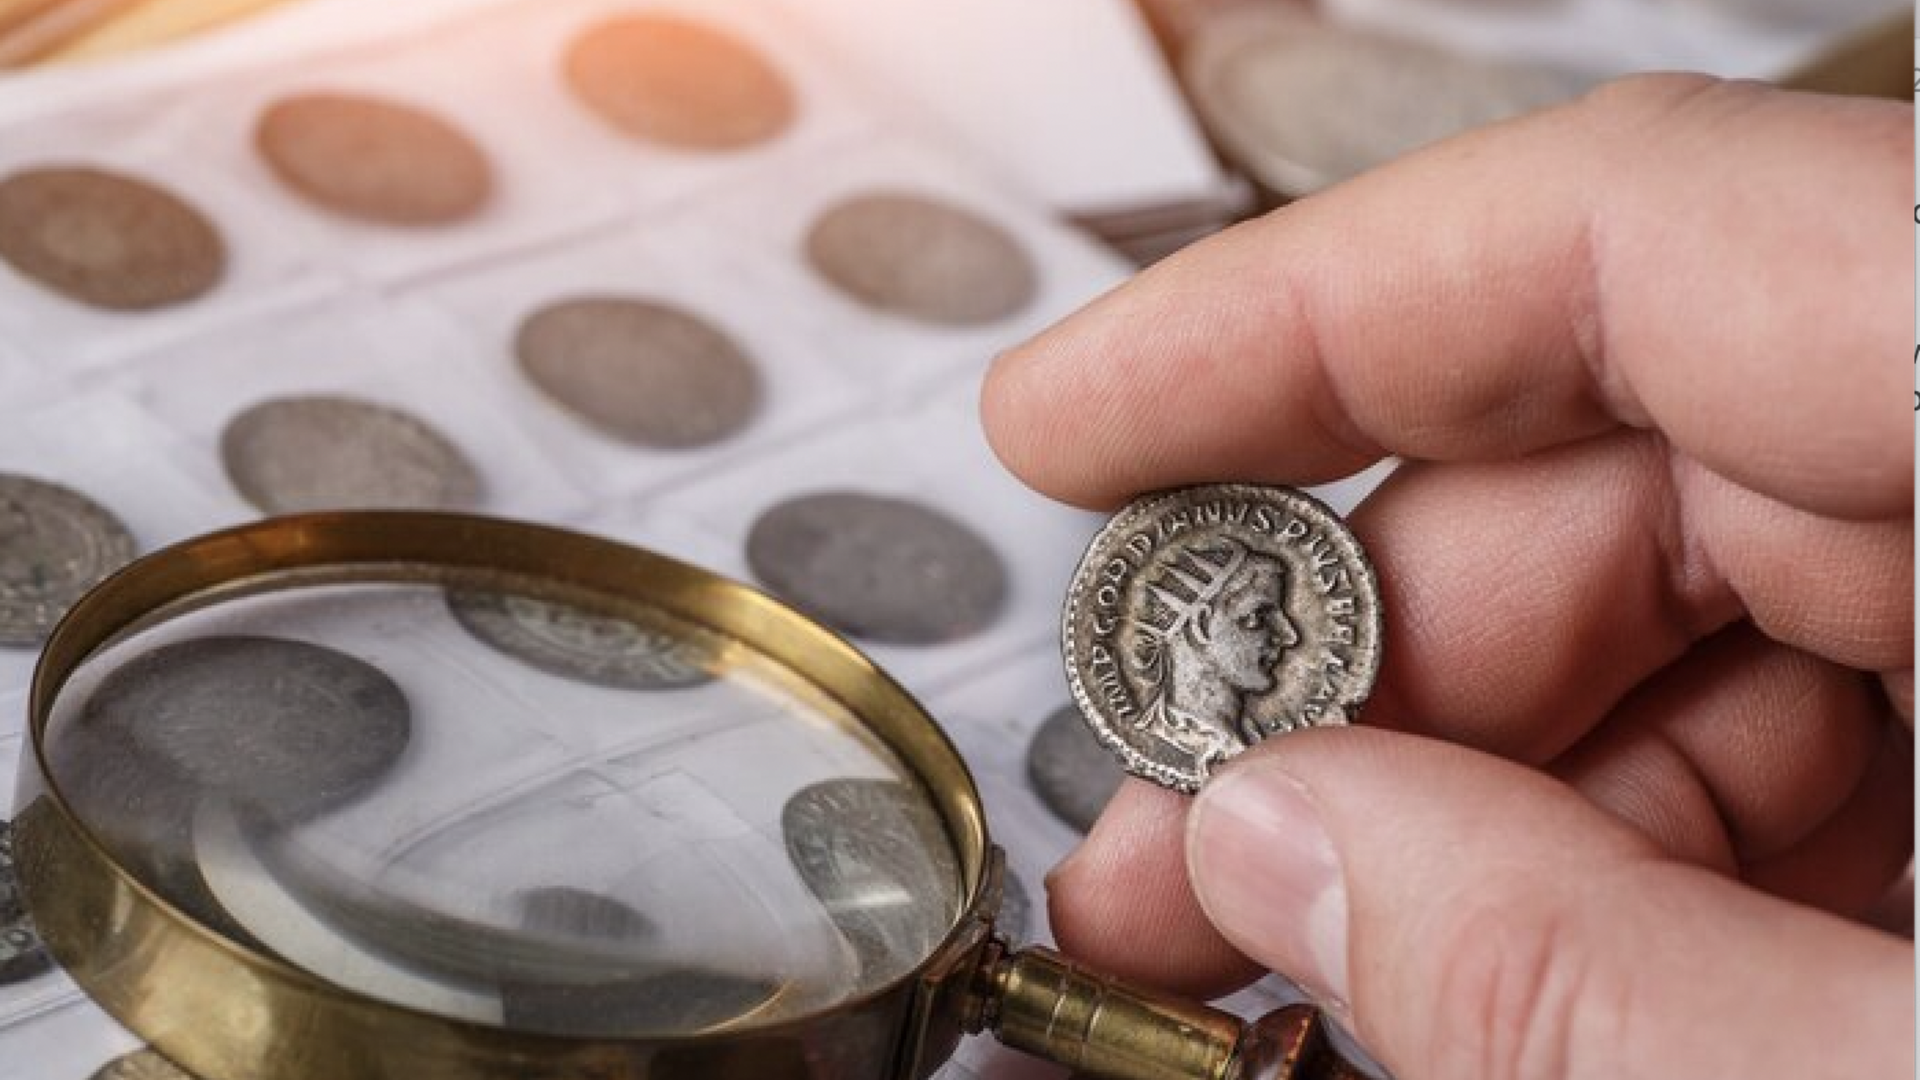 A visual representation of numismatics. In image: an individual holding up a coin for analysis